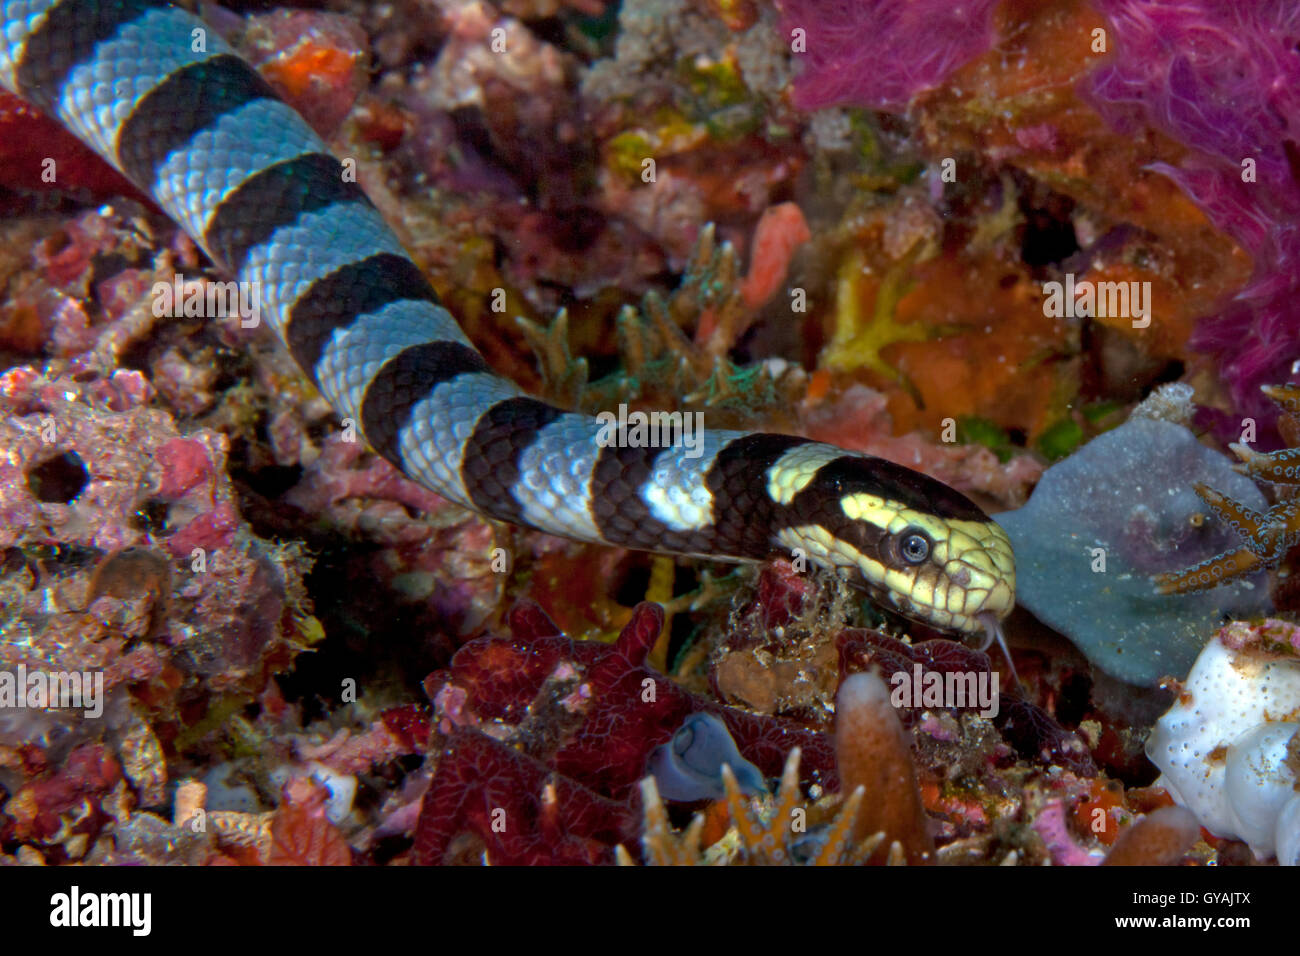 Banded sea snake, Laticauda colubrina, slithering along bottom of coral reef protrudes forked tongue to navigate. Stock Photo